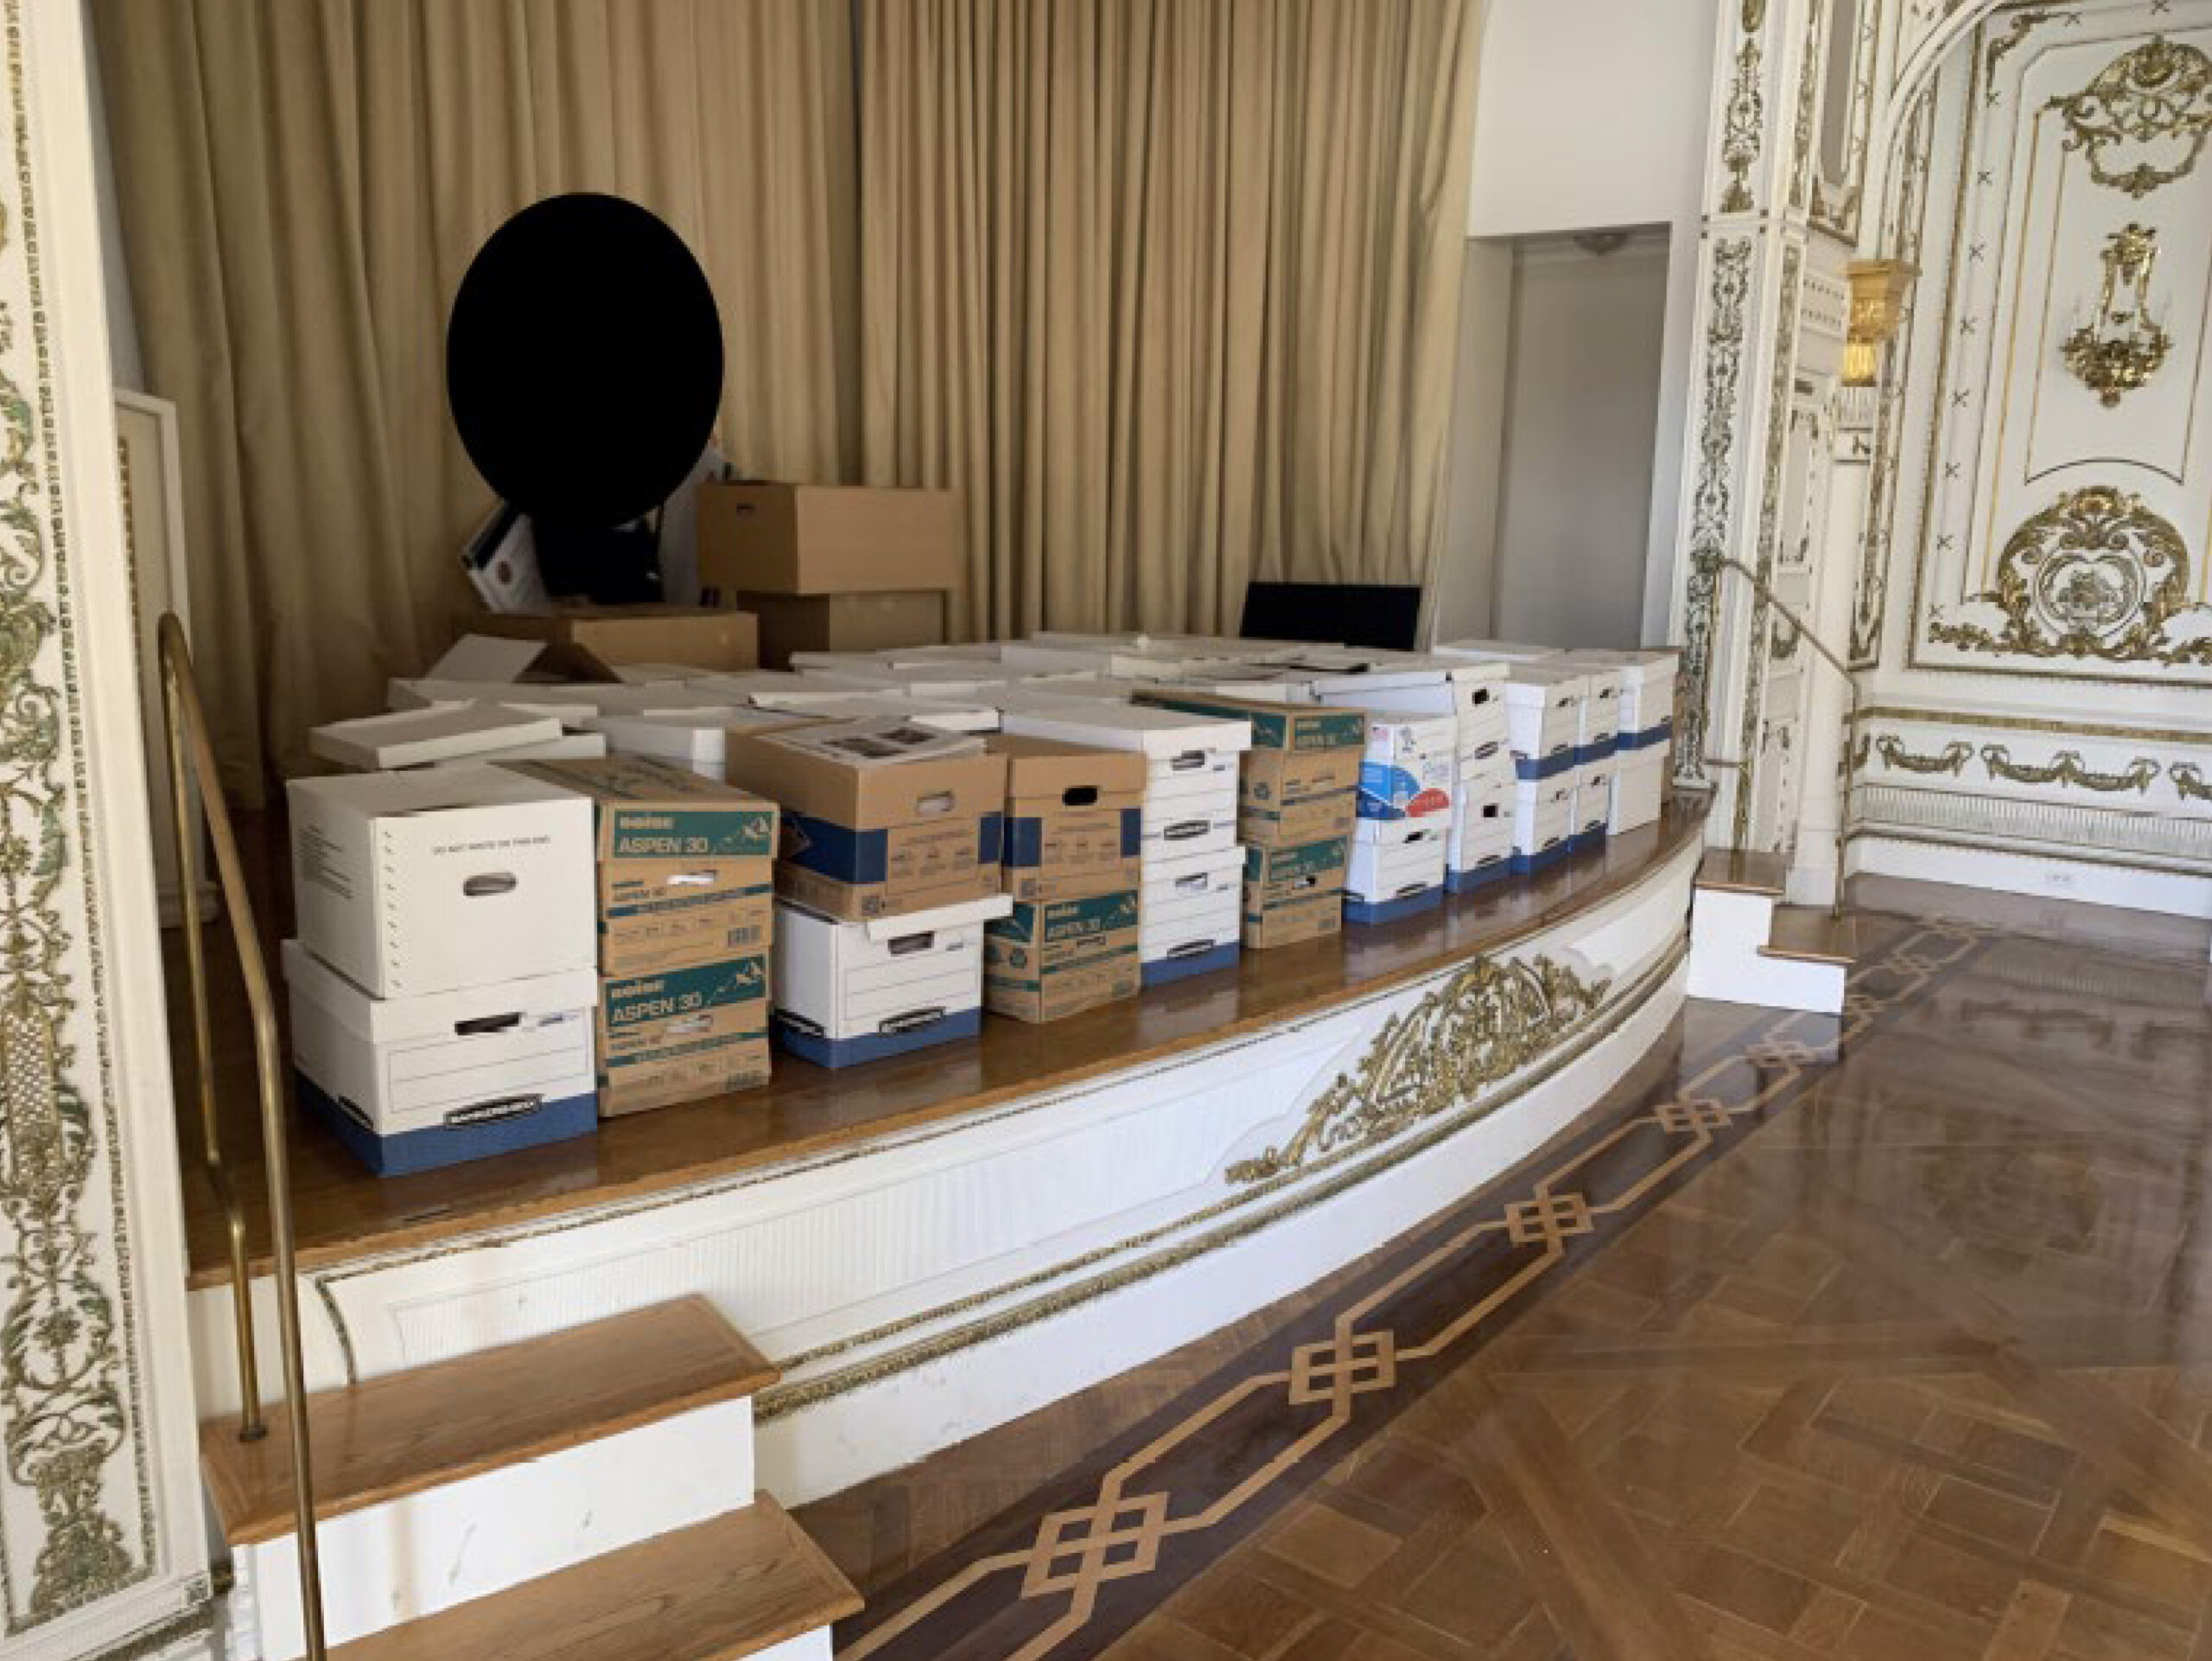 This image, contained in the indictment against former President Donald Trump, shows boxes of recor...